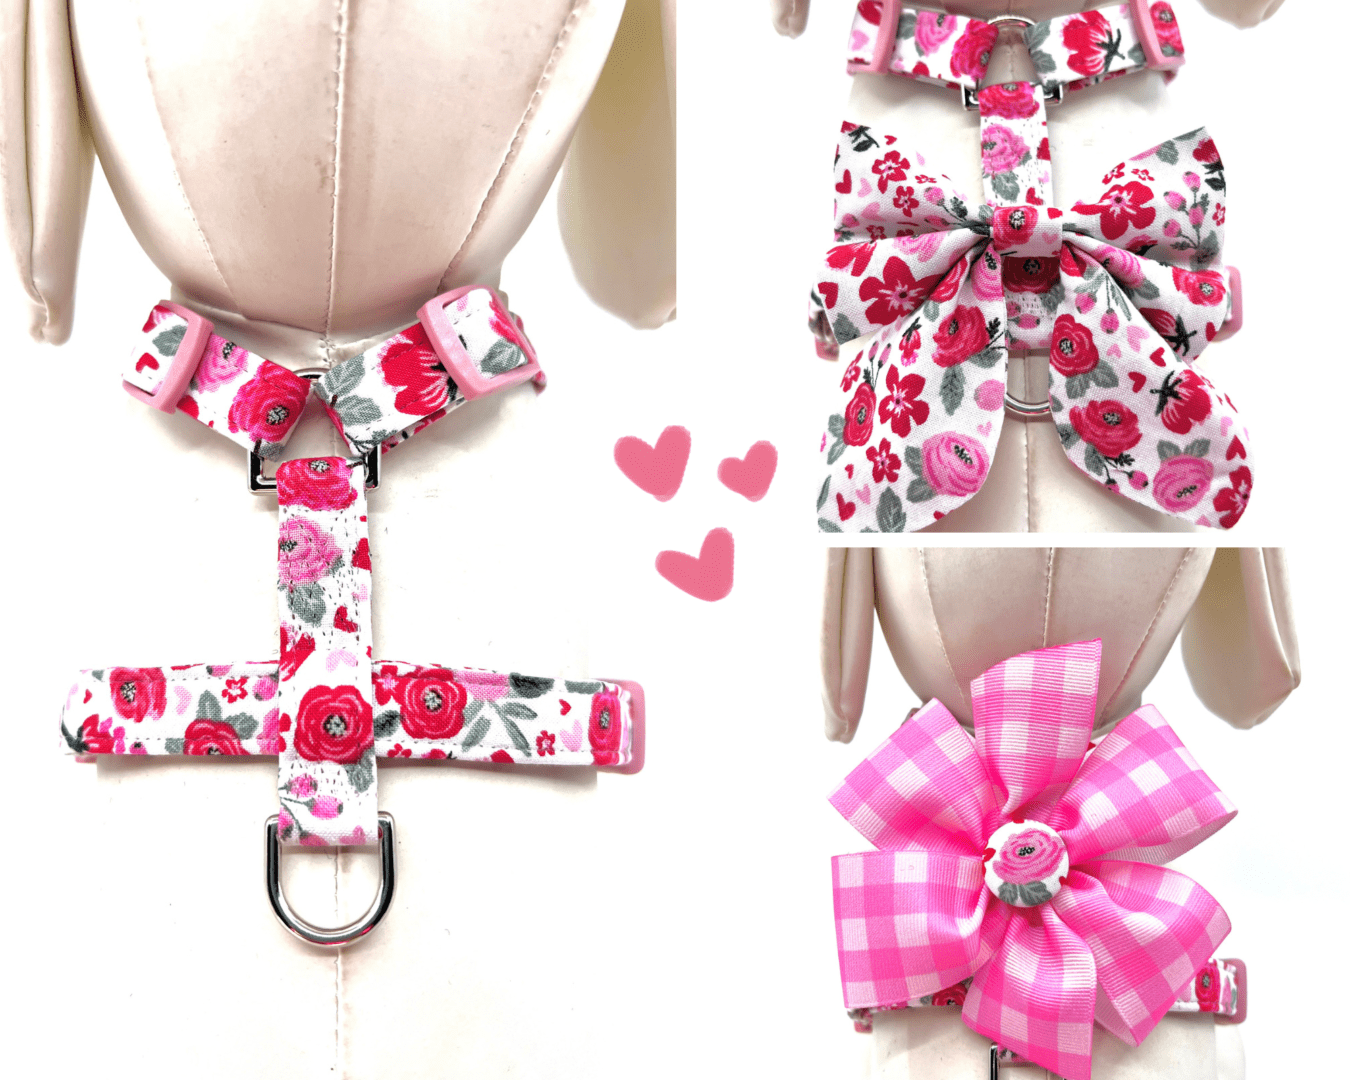 A dog harness with pink flowers and bows.